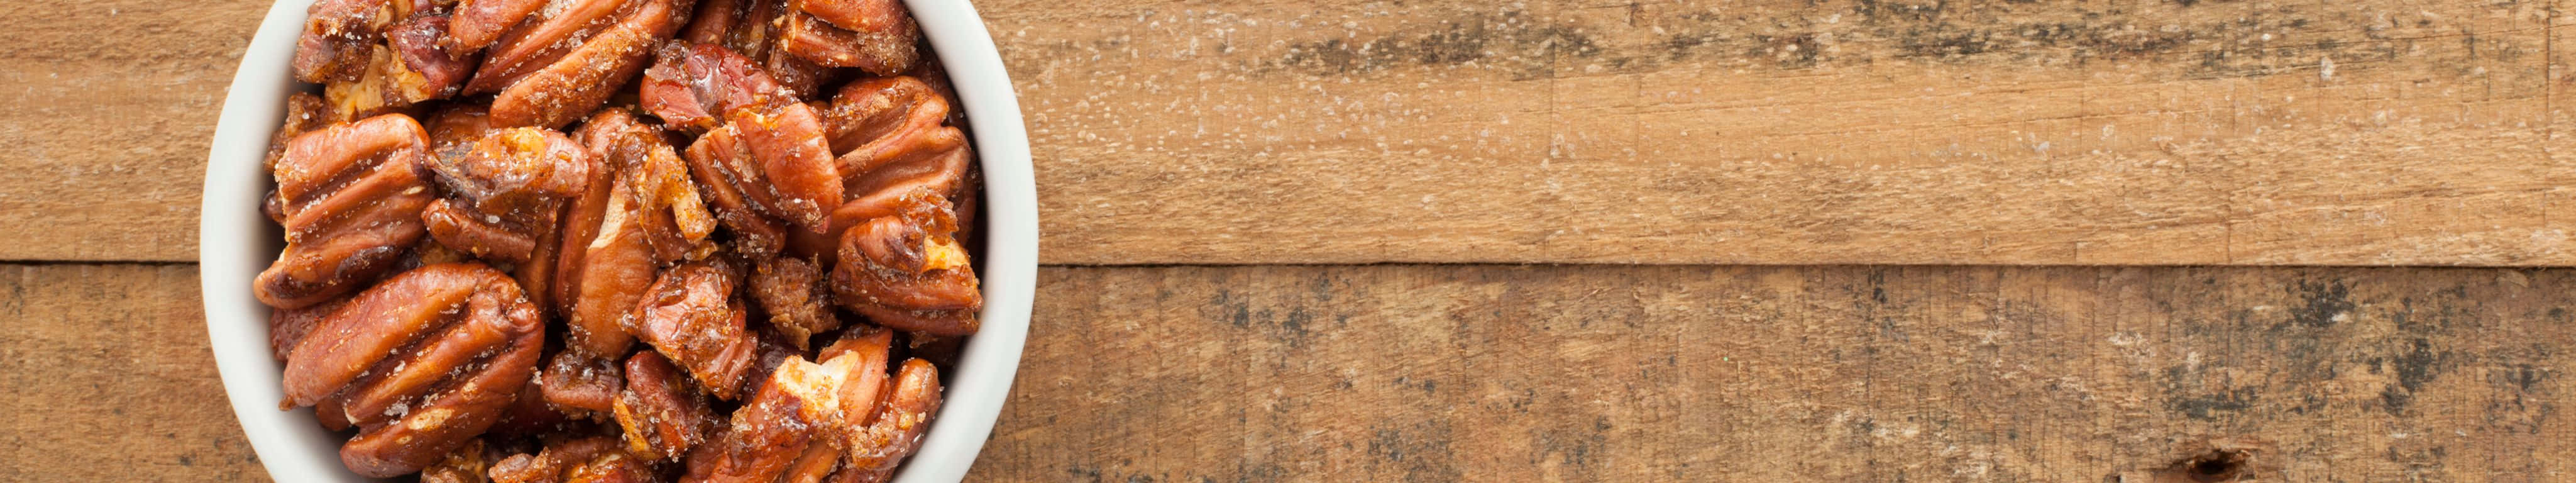 A Bowl Of Dried Nuts On A Wooden Table Wallpaper